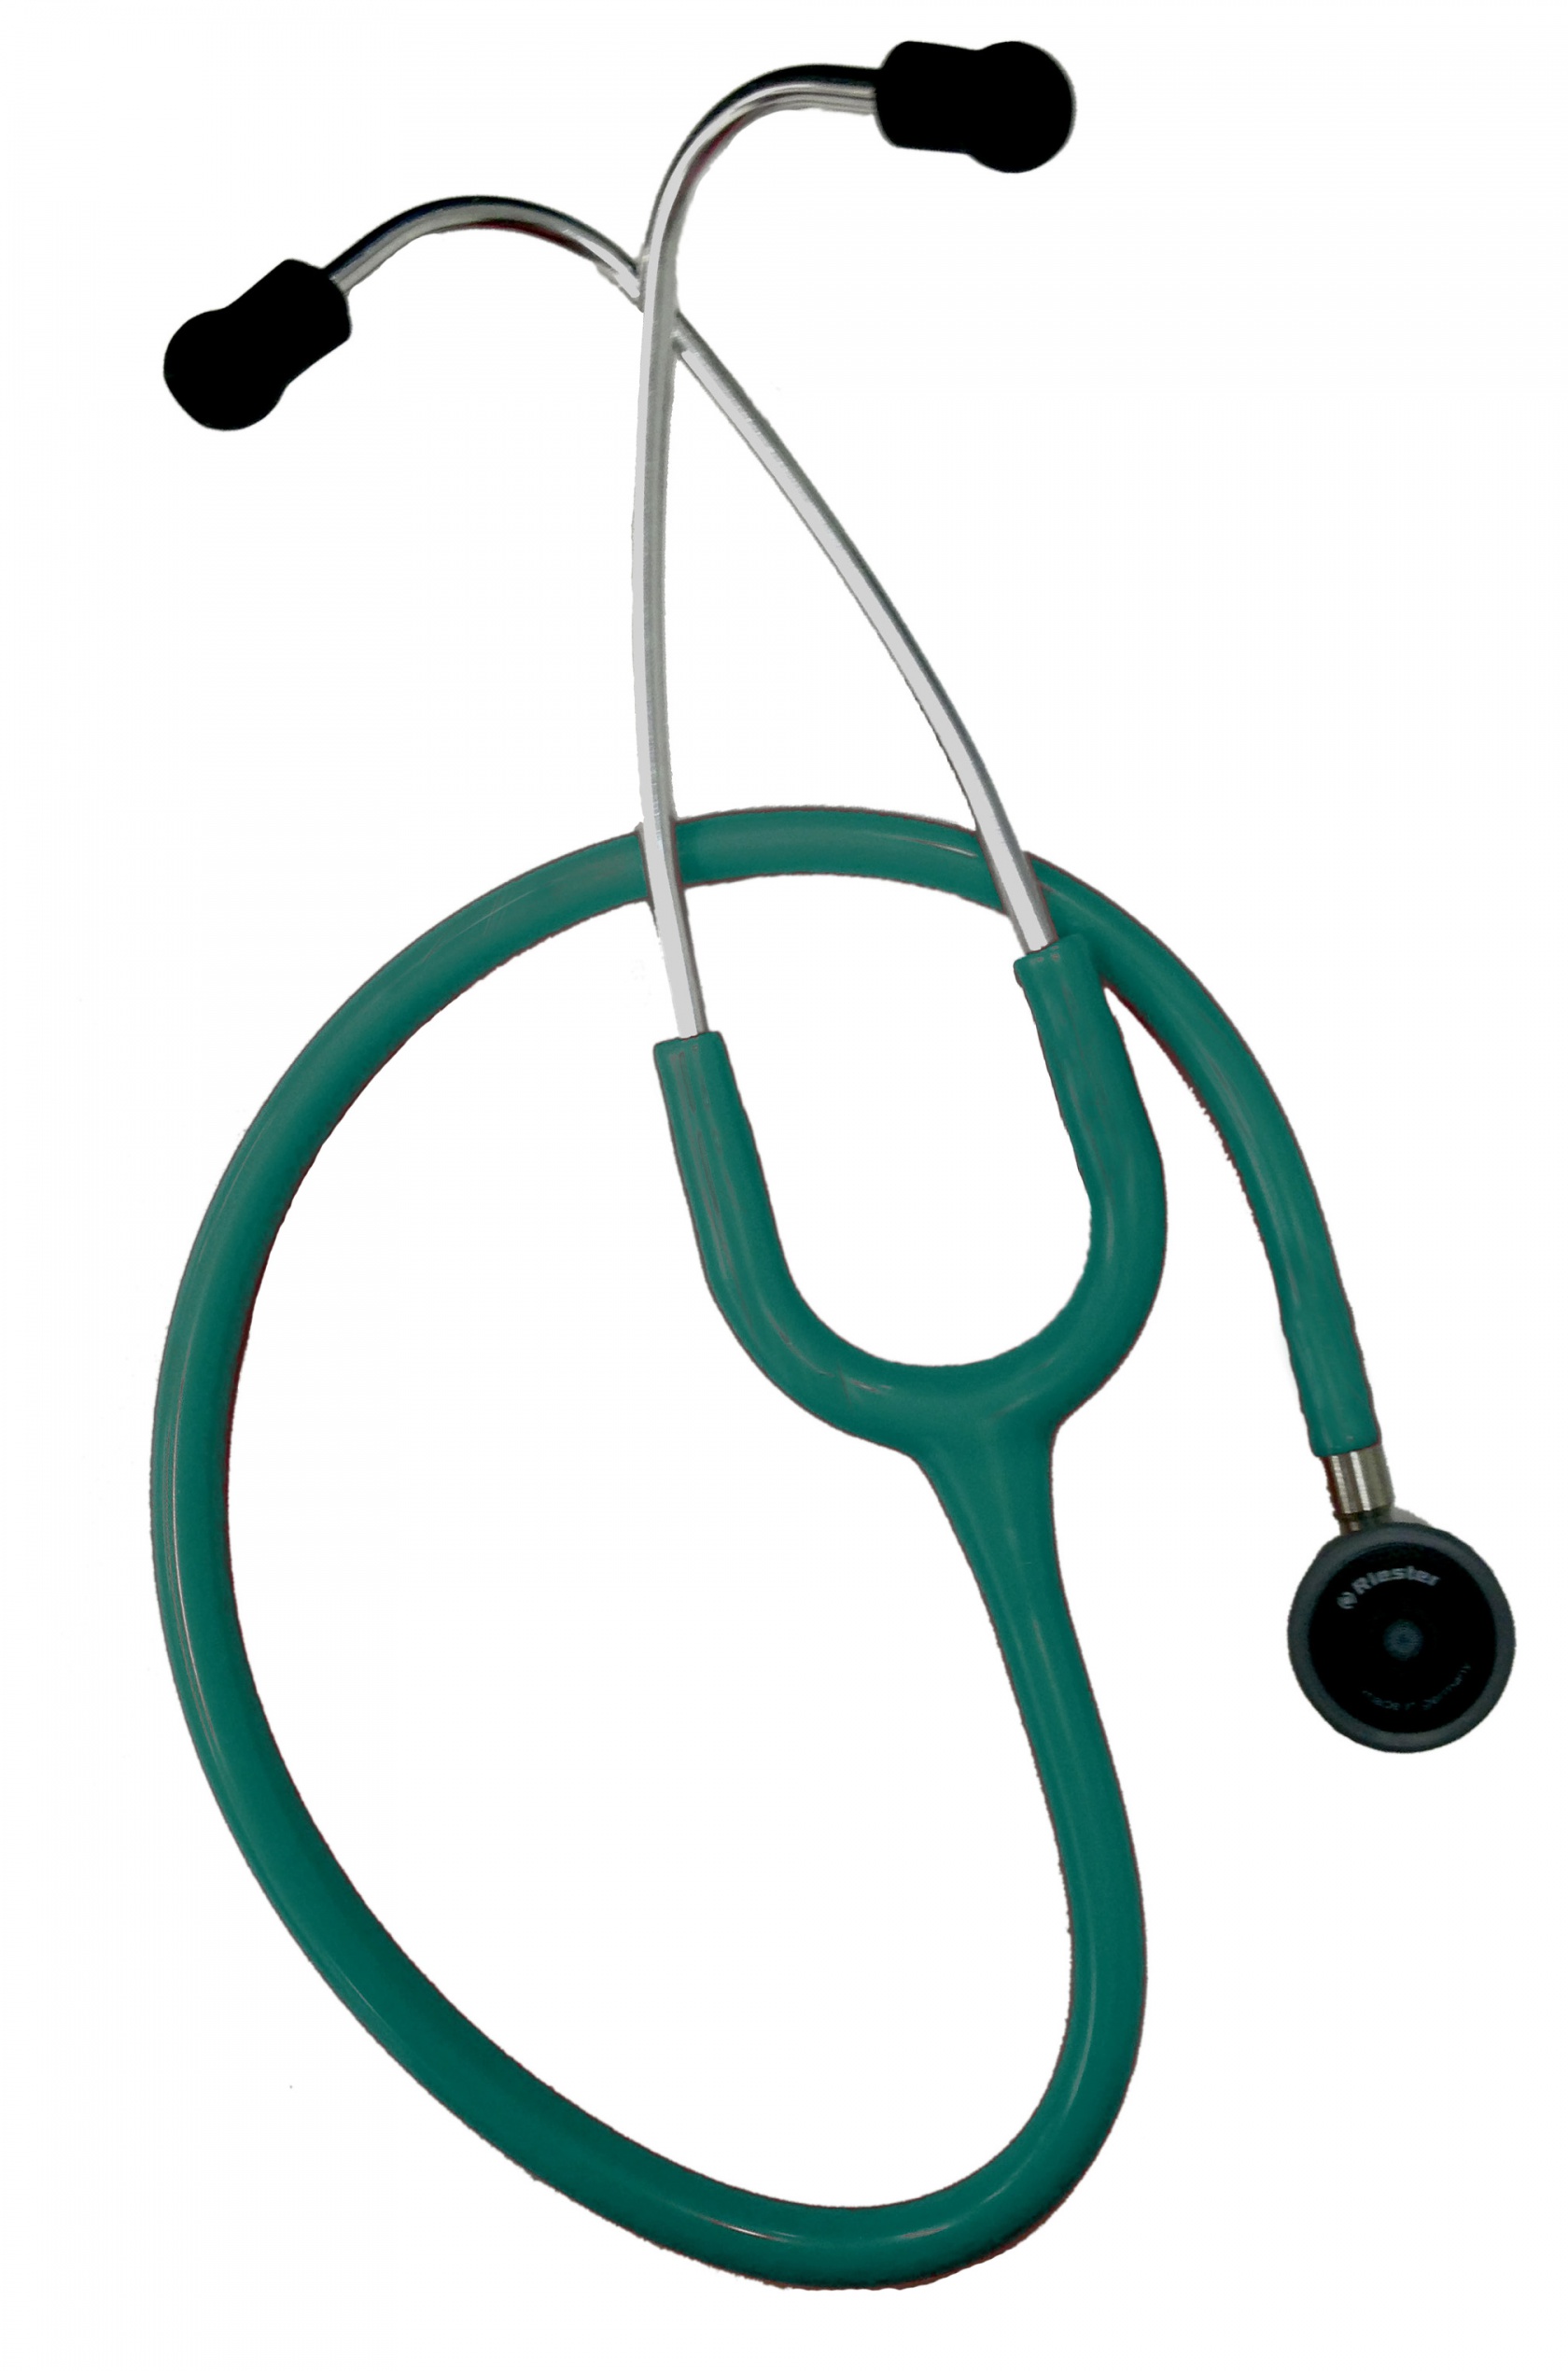 Riester Stethoscope Duplex 2.0 Infant Green image 0